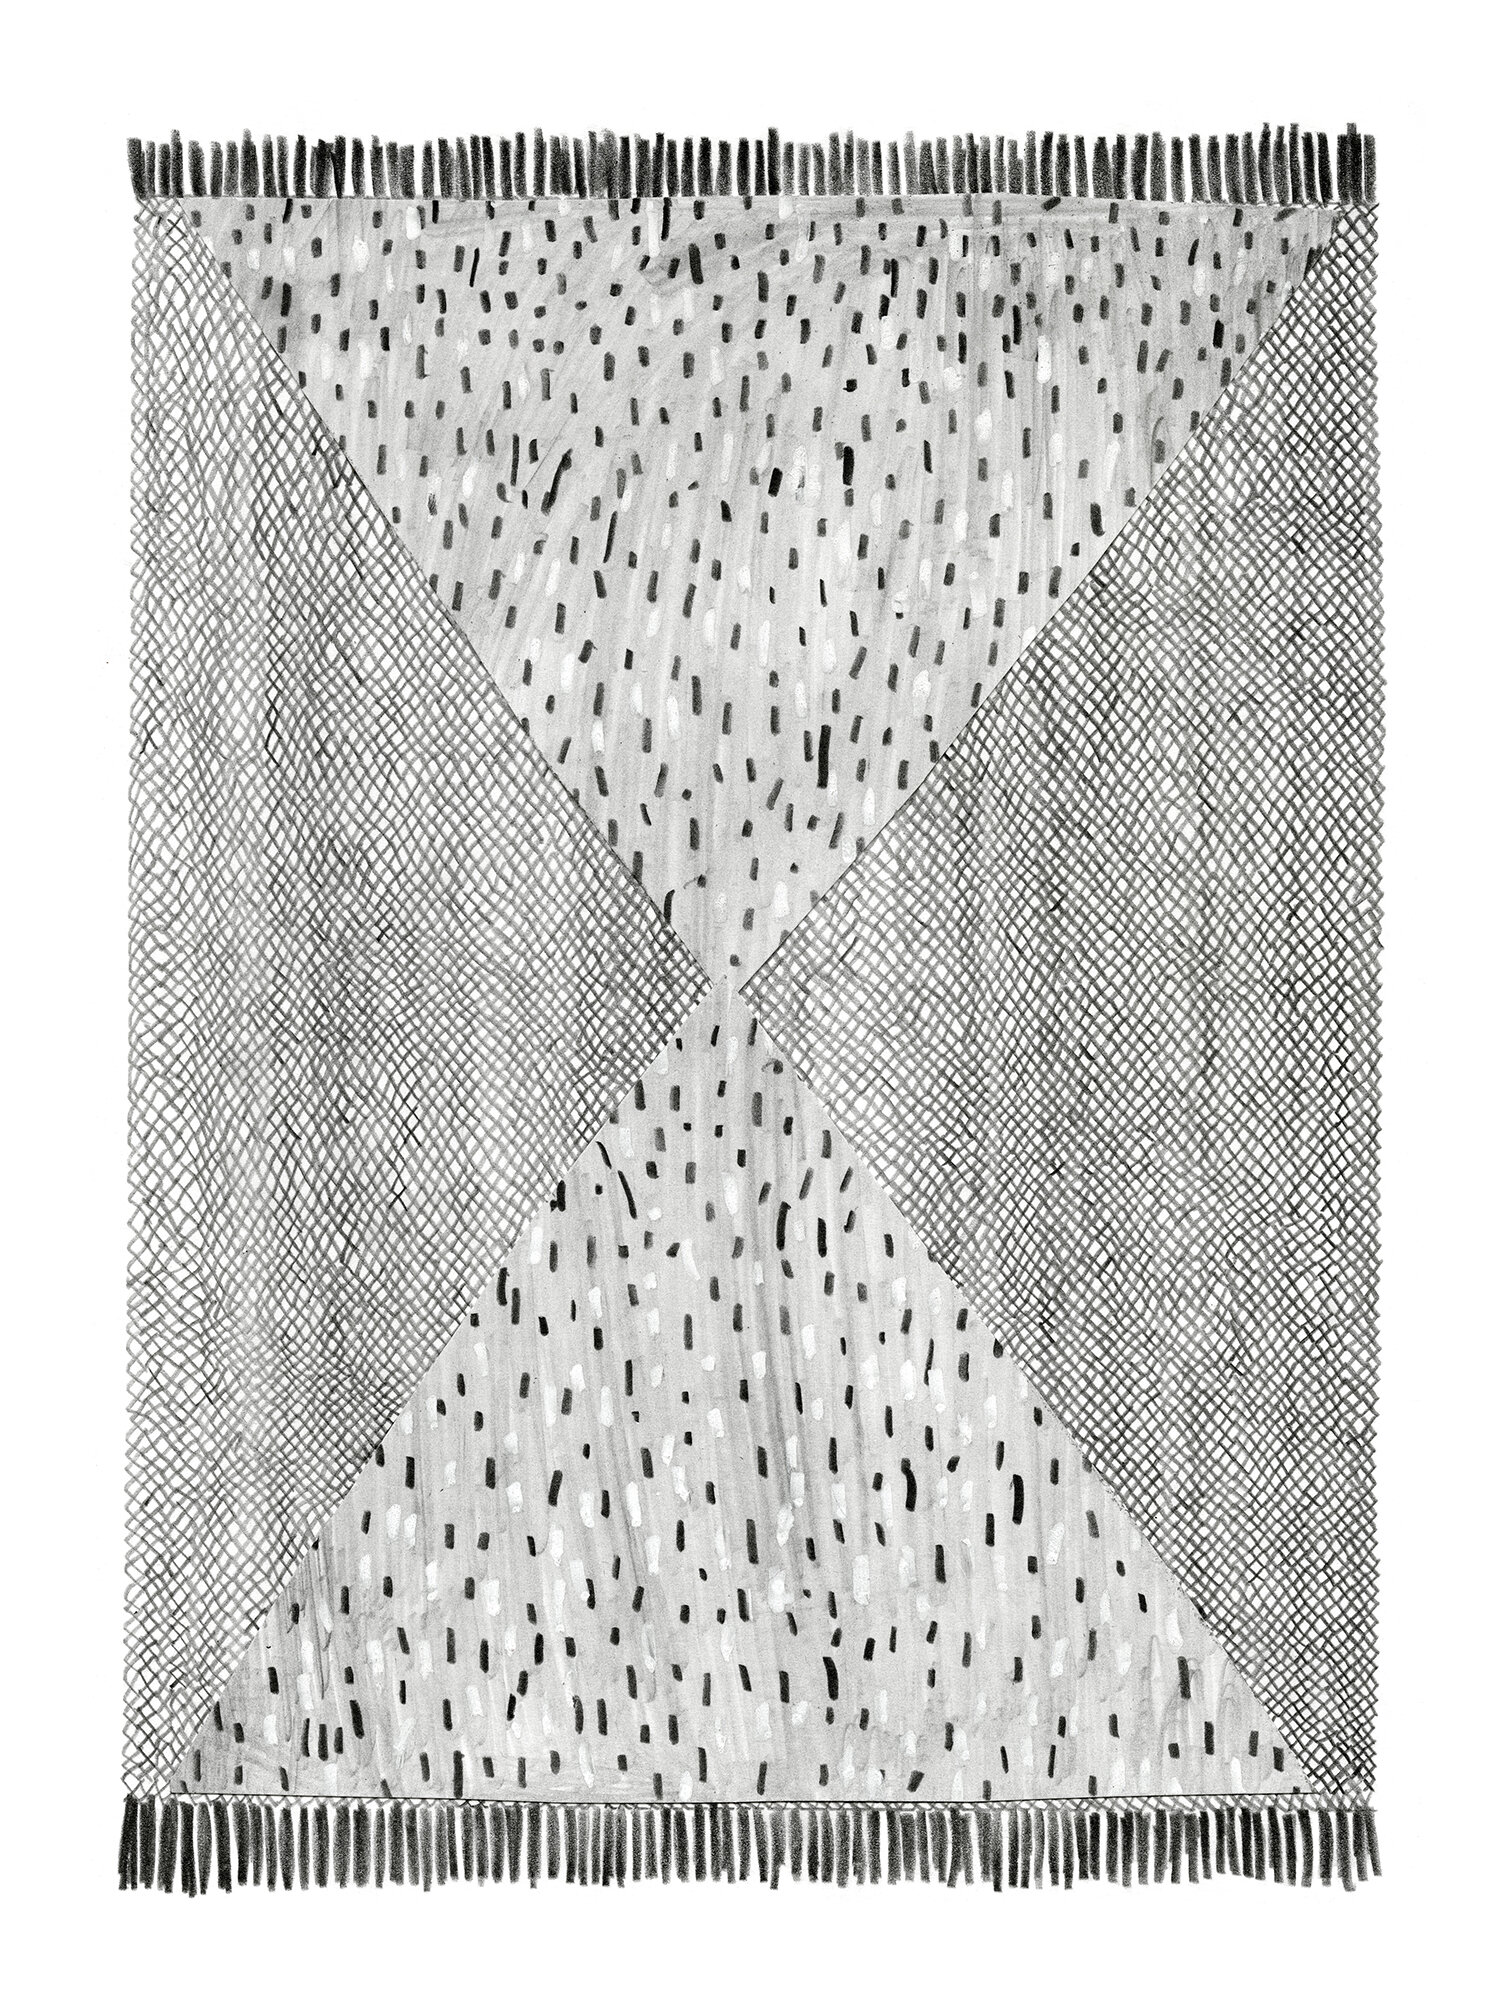   Small Weave with Confetti Pattern Rug   Pencil on paper 12 x 9 inches    